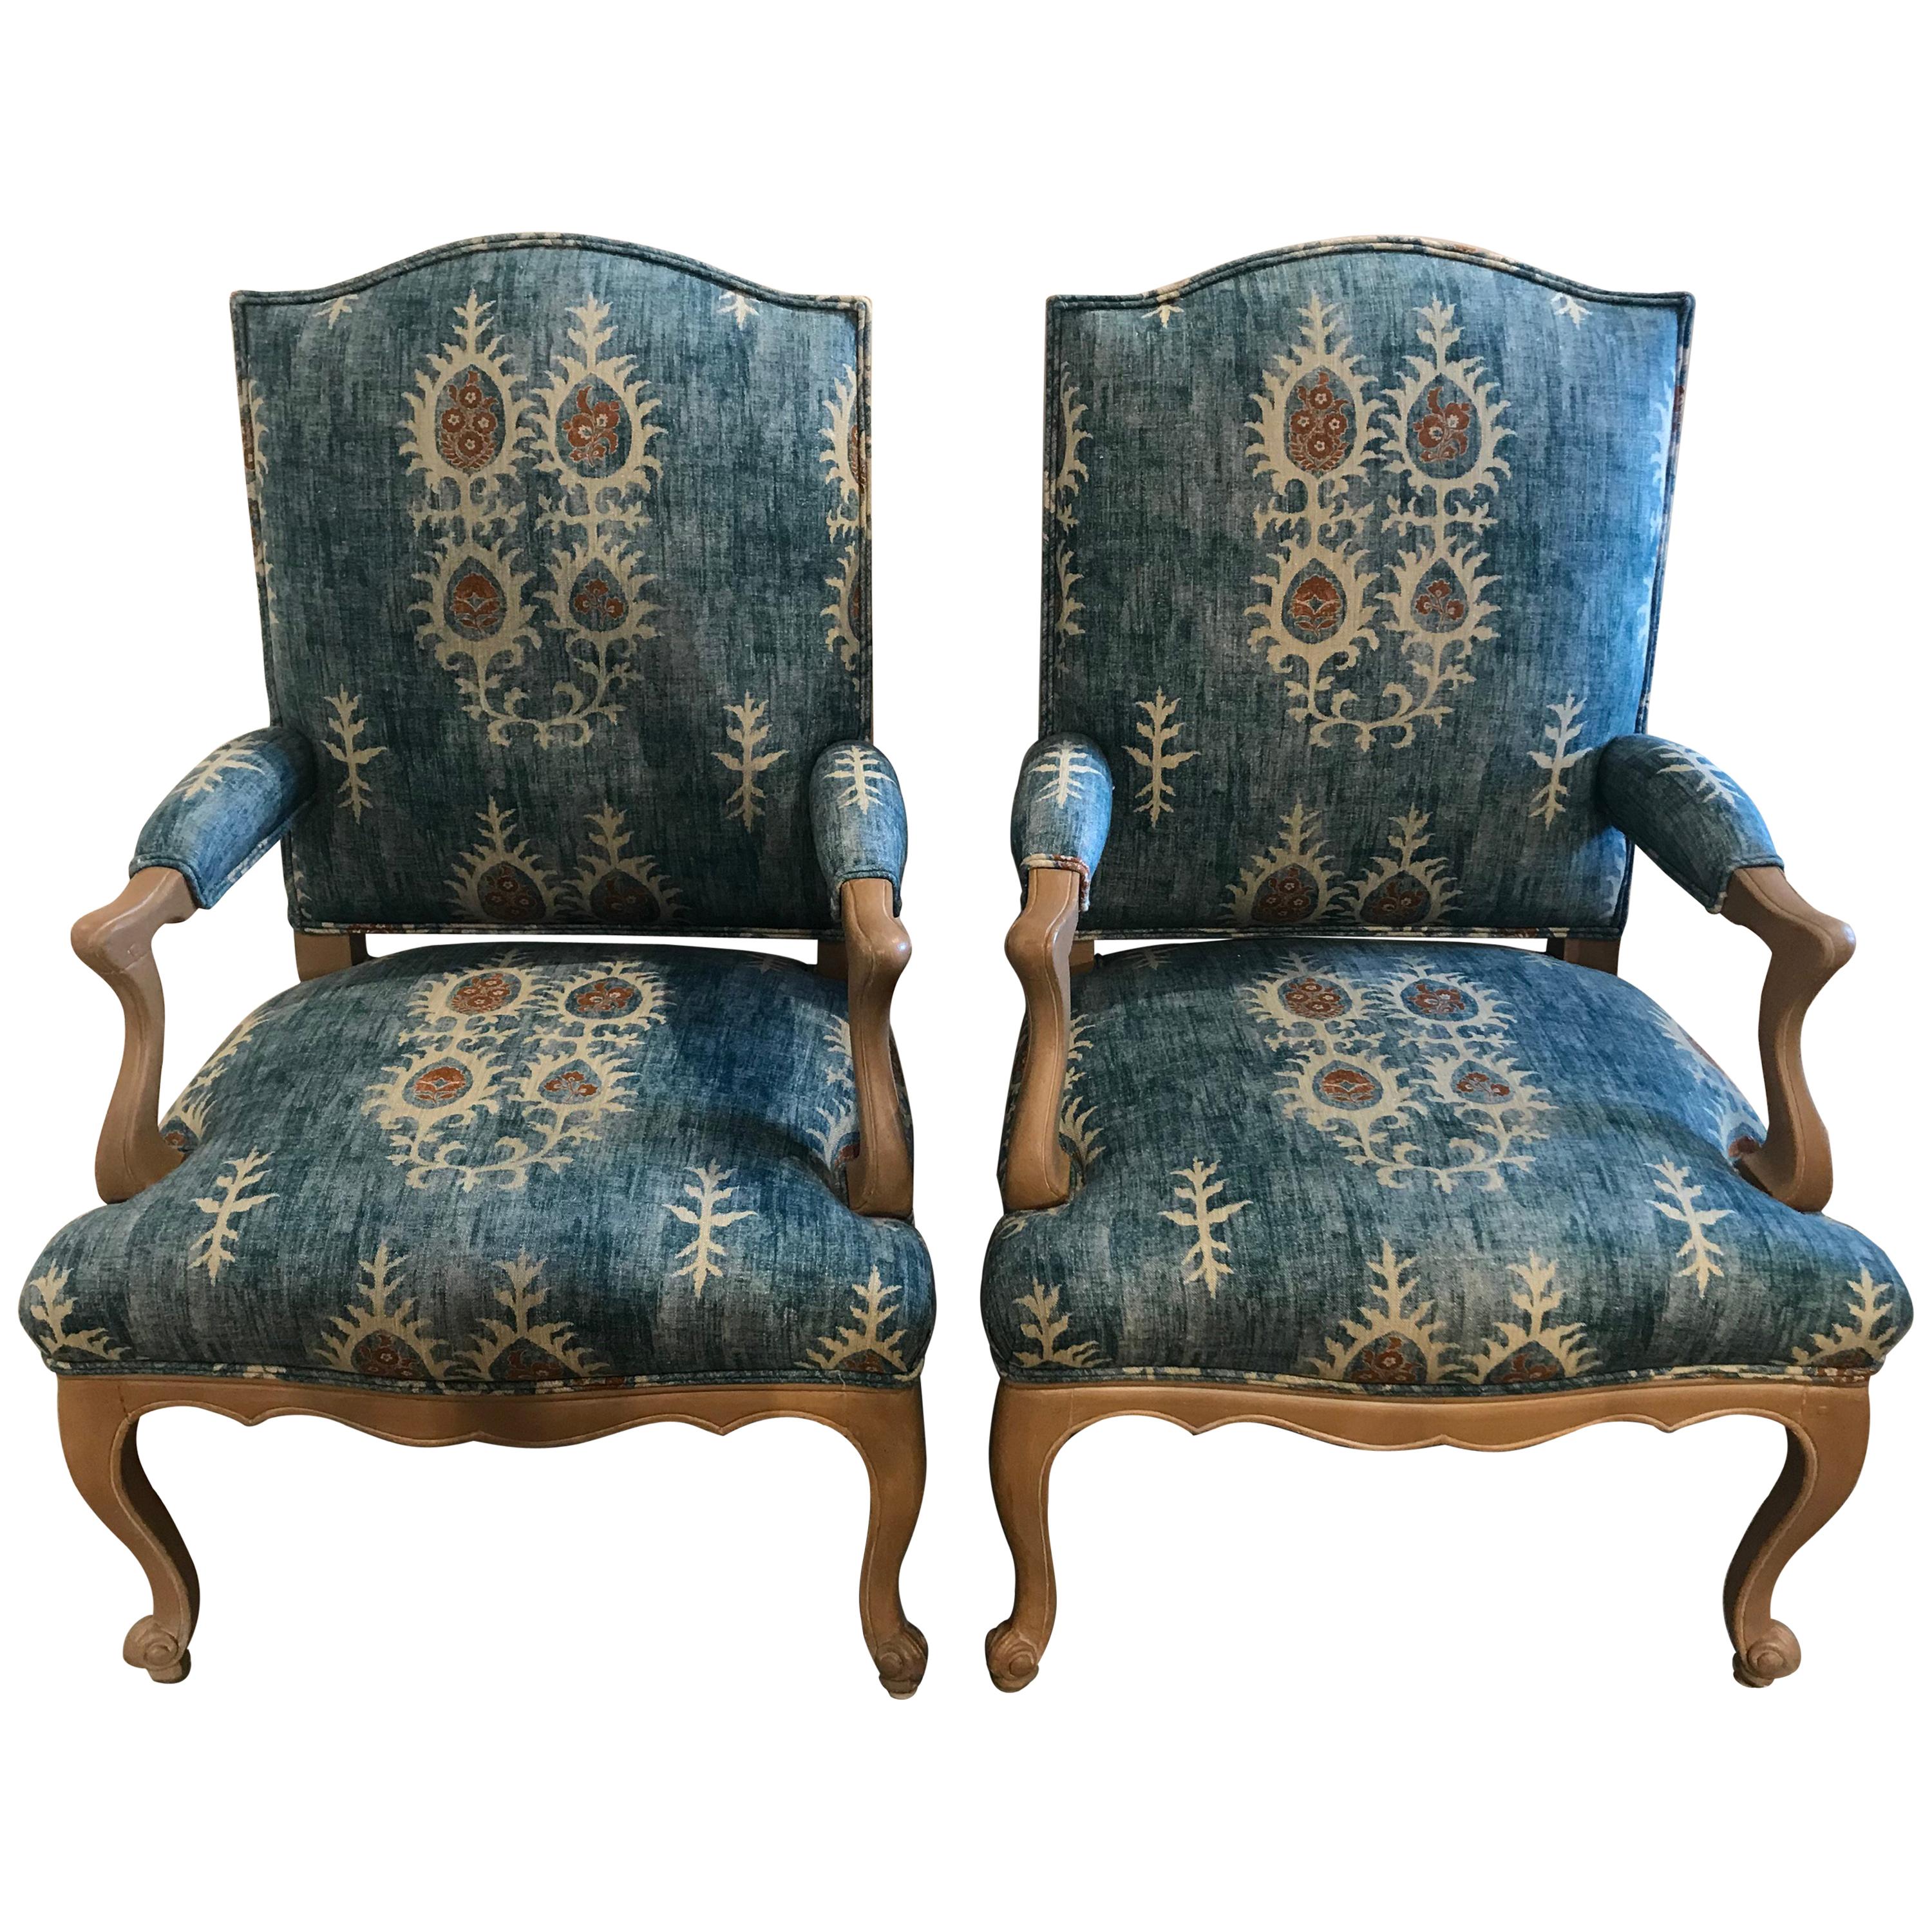 Pair of 19th Century Glaze Painted Armchairs For Sale